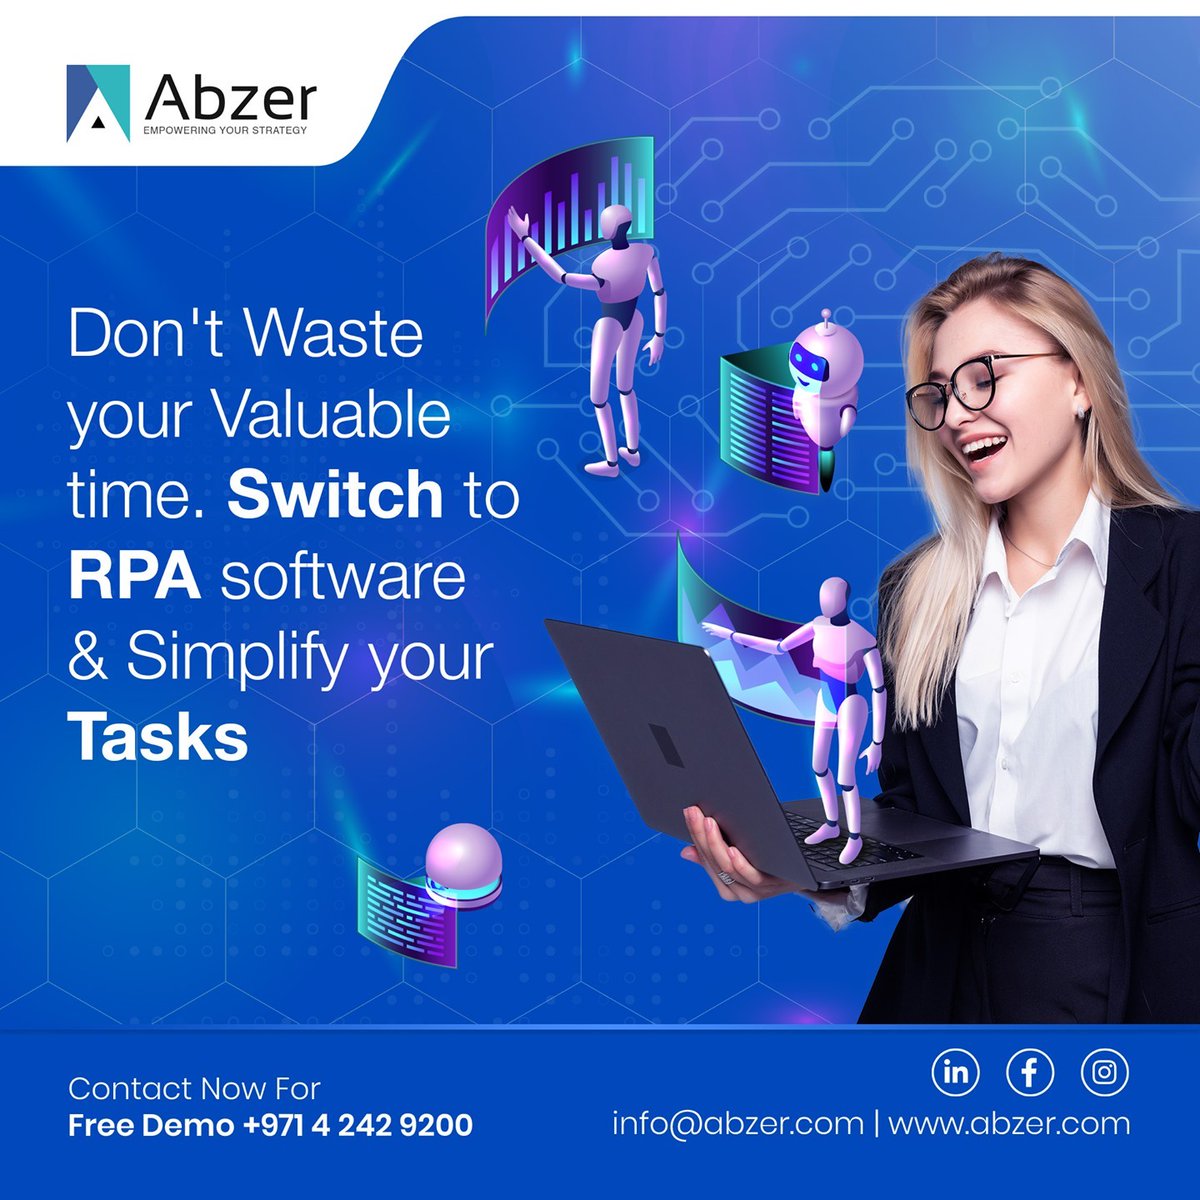 Simplify your repetitive business procedures and get your work done faster. Make efficient use of your employee's time and increase your Return on Investment(RoI).
Visit for More Info : abzer.com
WhatsApp : +971 505 434 524
#abzertechnology #ProcessAutomation #RPA